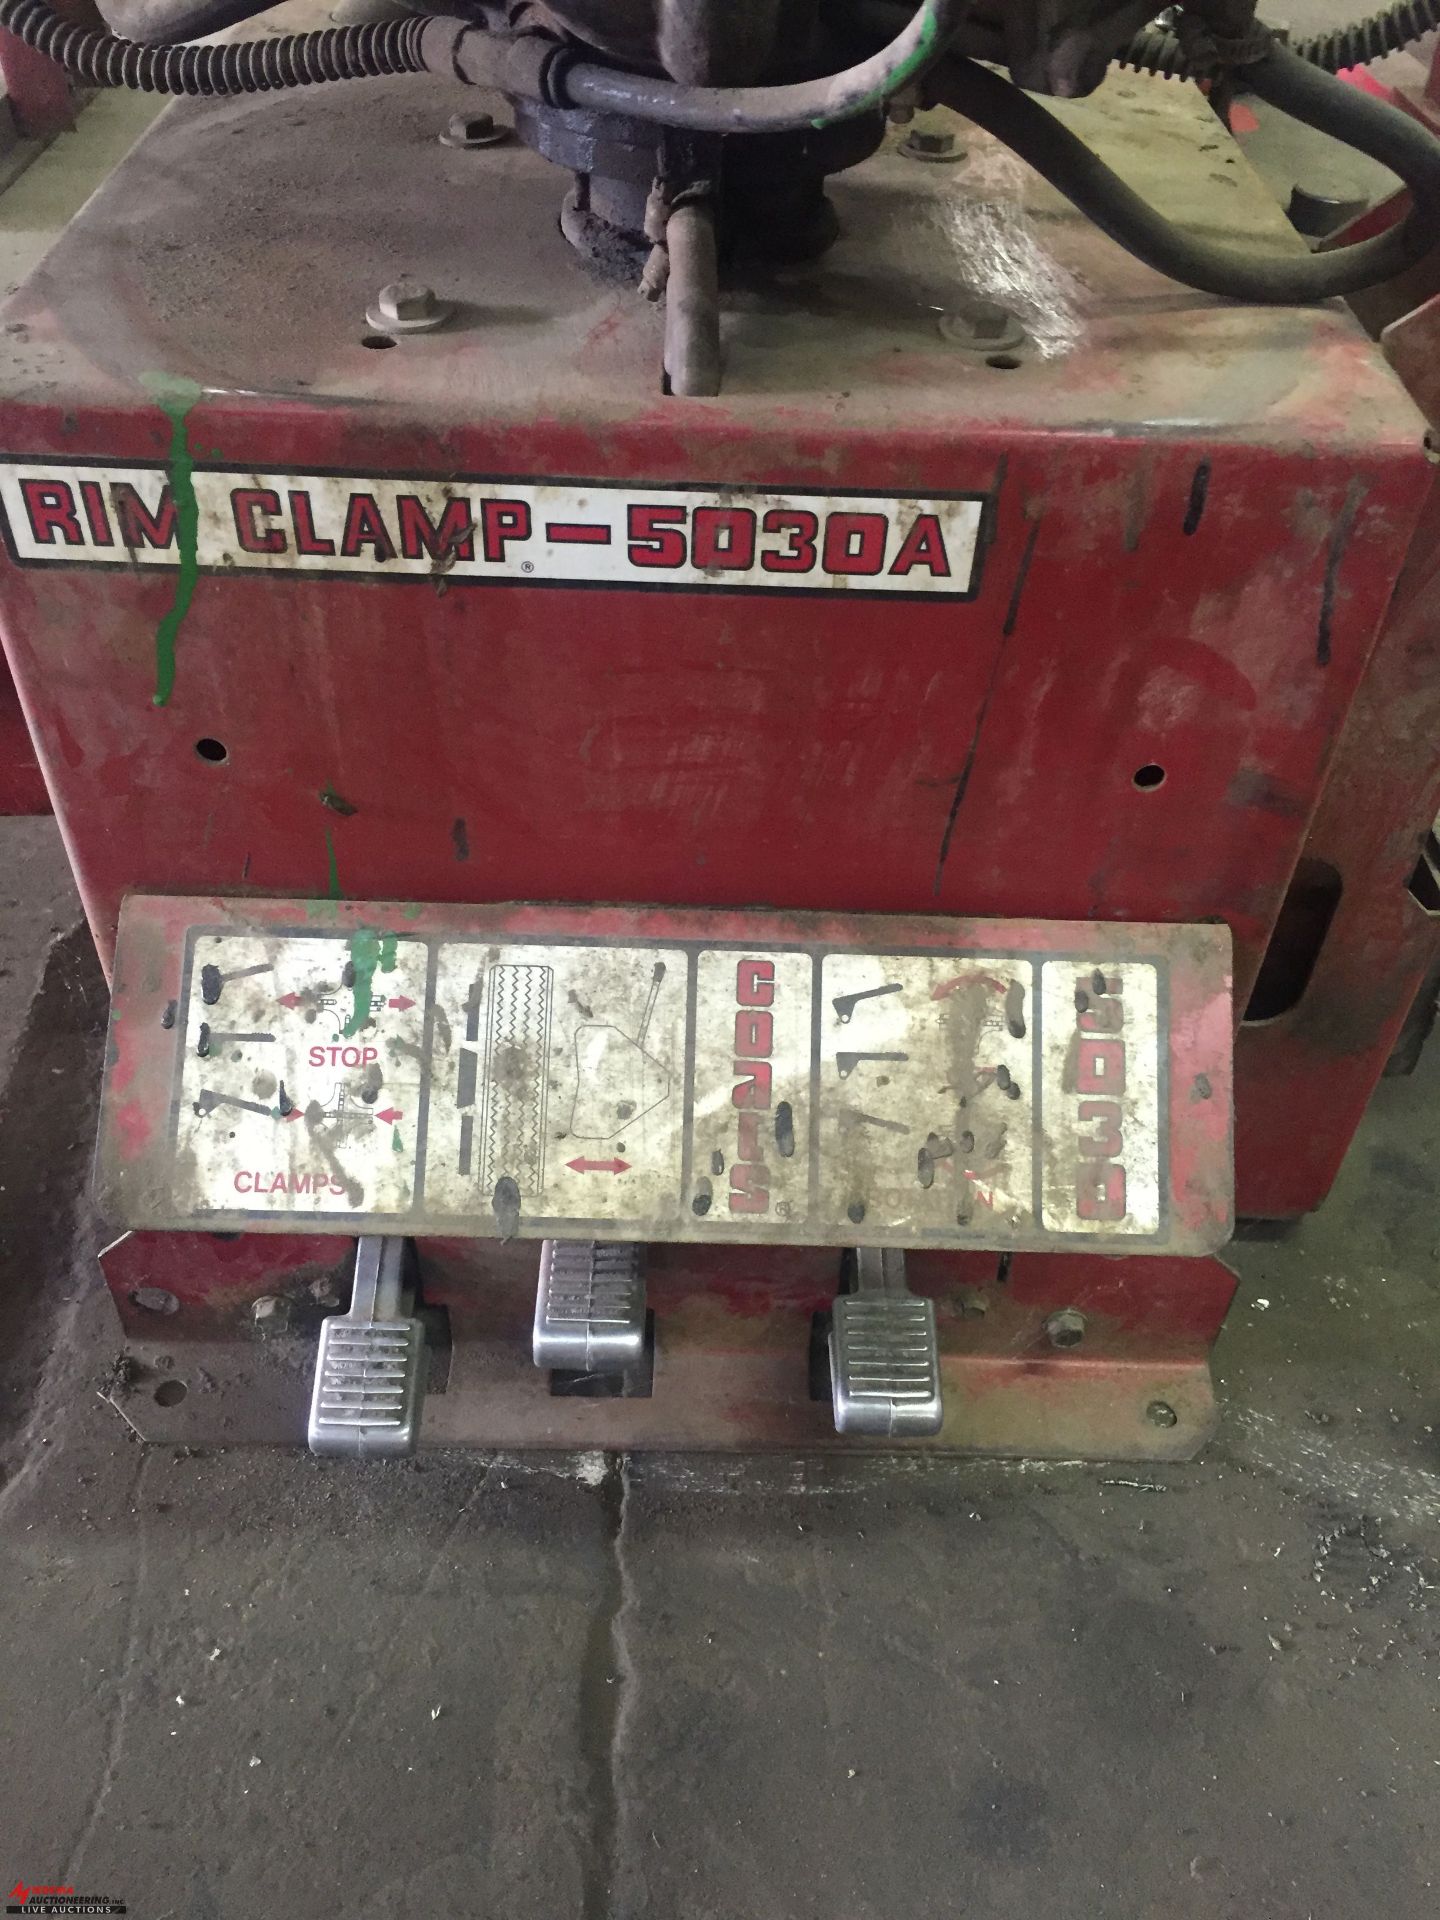 COATS 5030A RIM CLAMP TIRE MACHINE [LOCATION: EAST WINANS STREET LOCATION] - Image 3 of 3